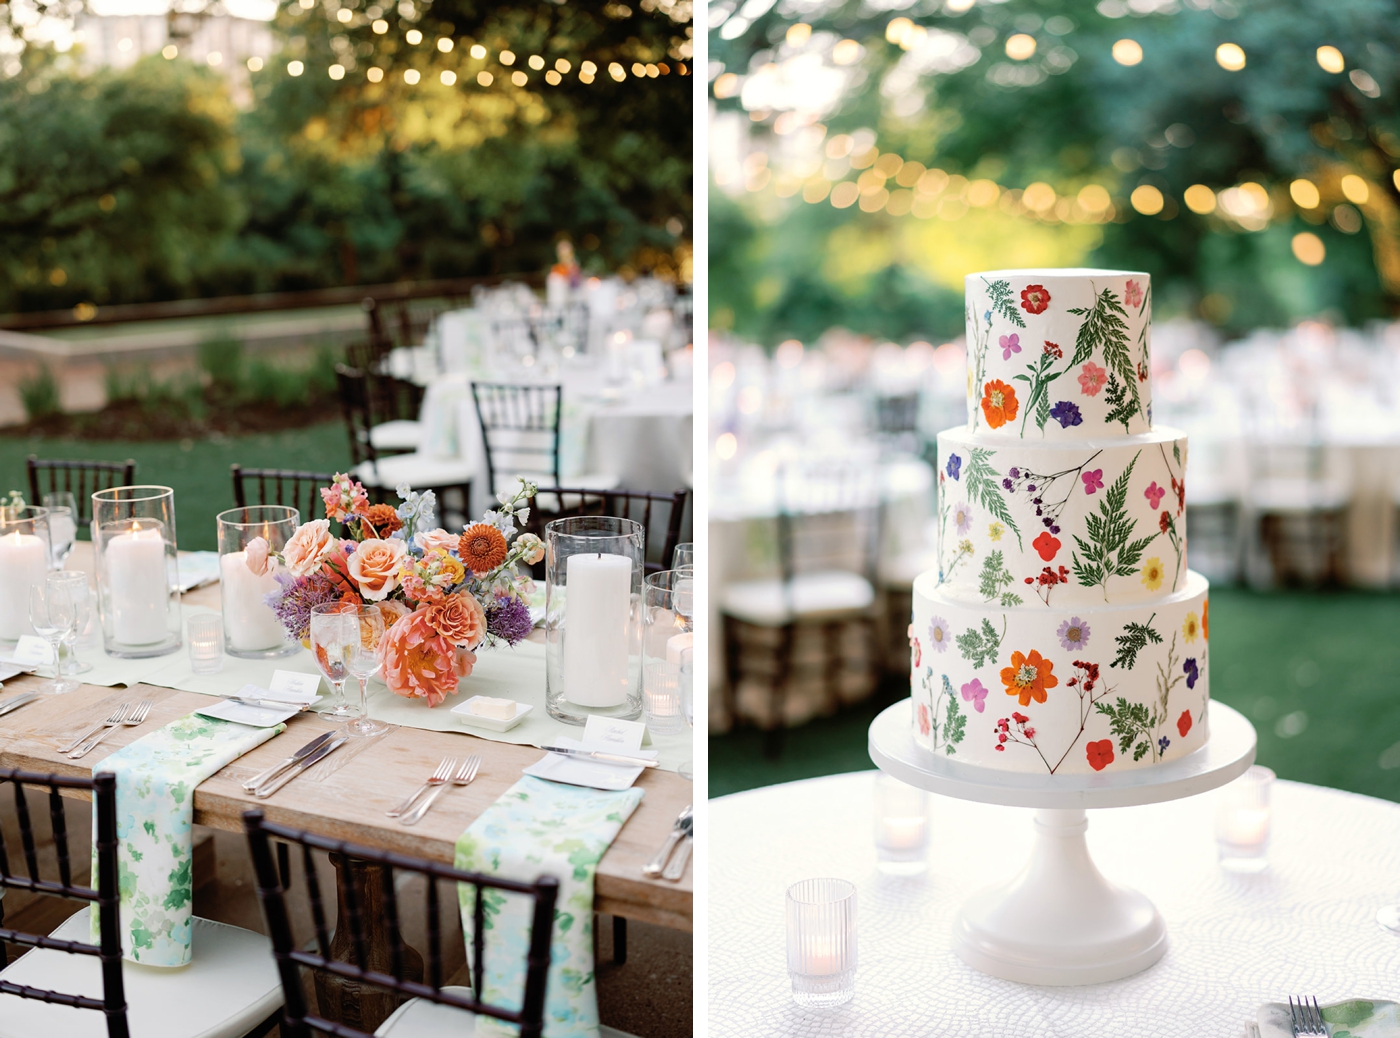 Cake covered in pressed flowers at an Austin garden party wedding 